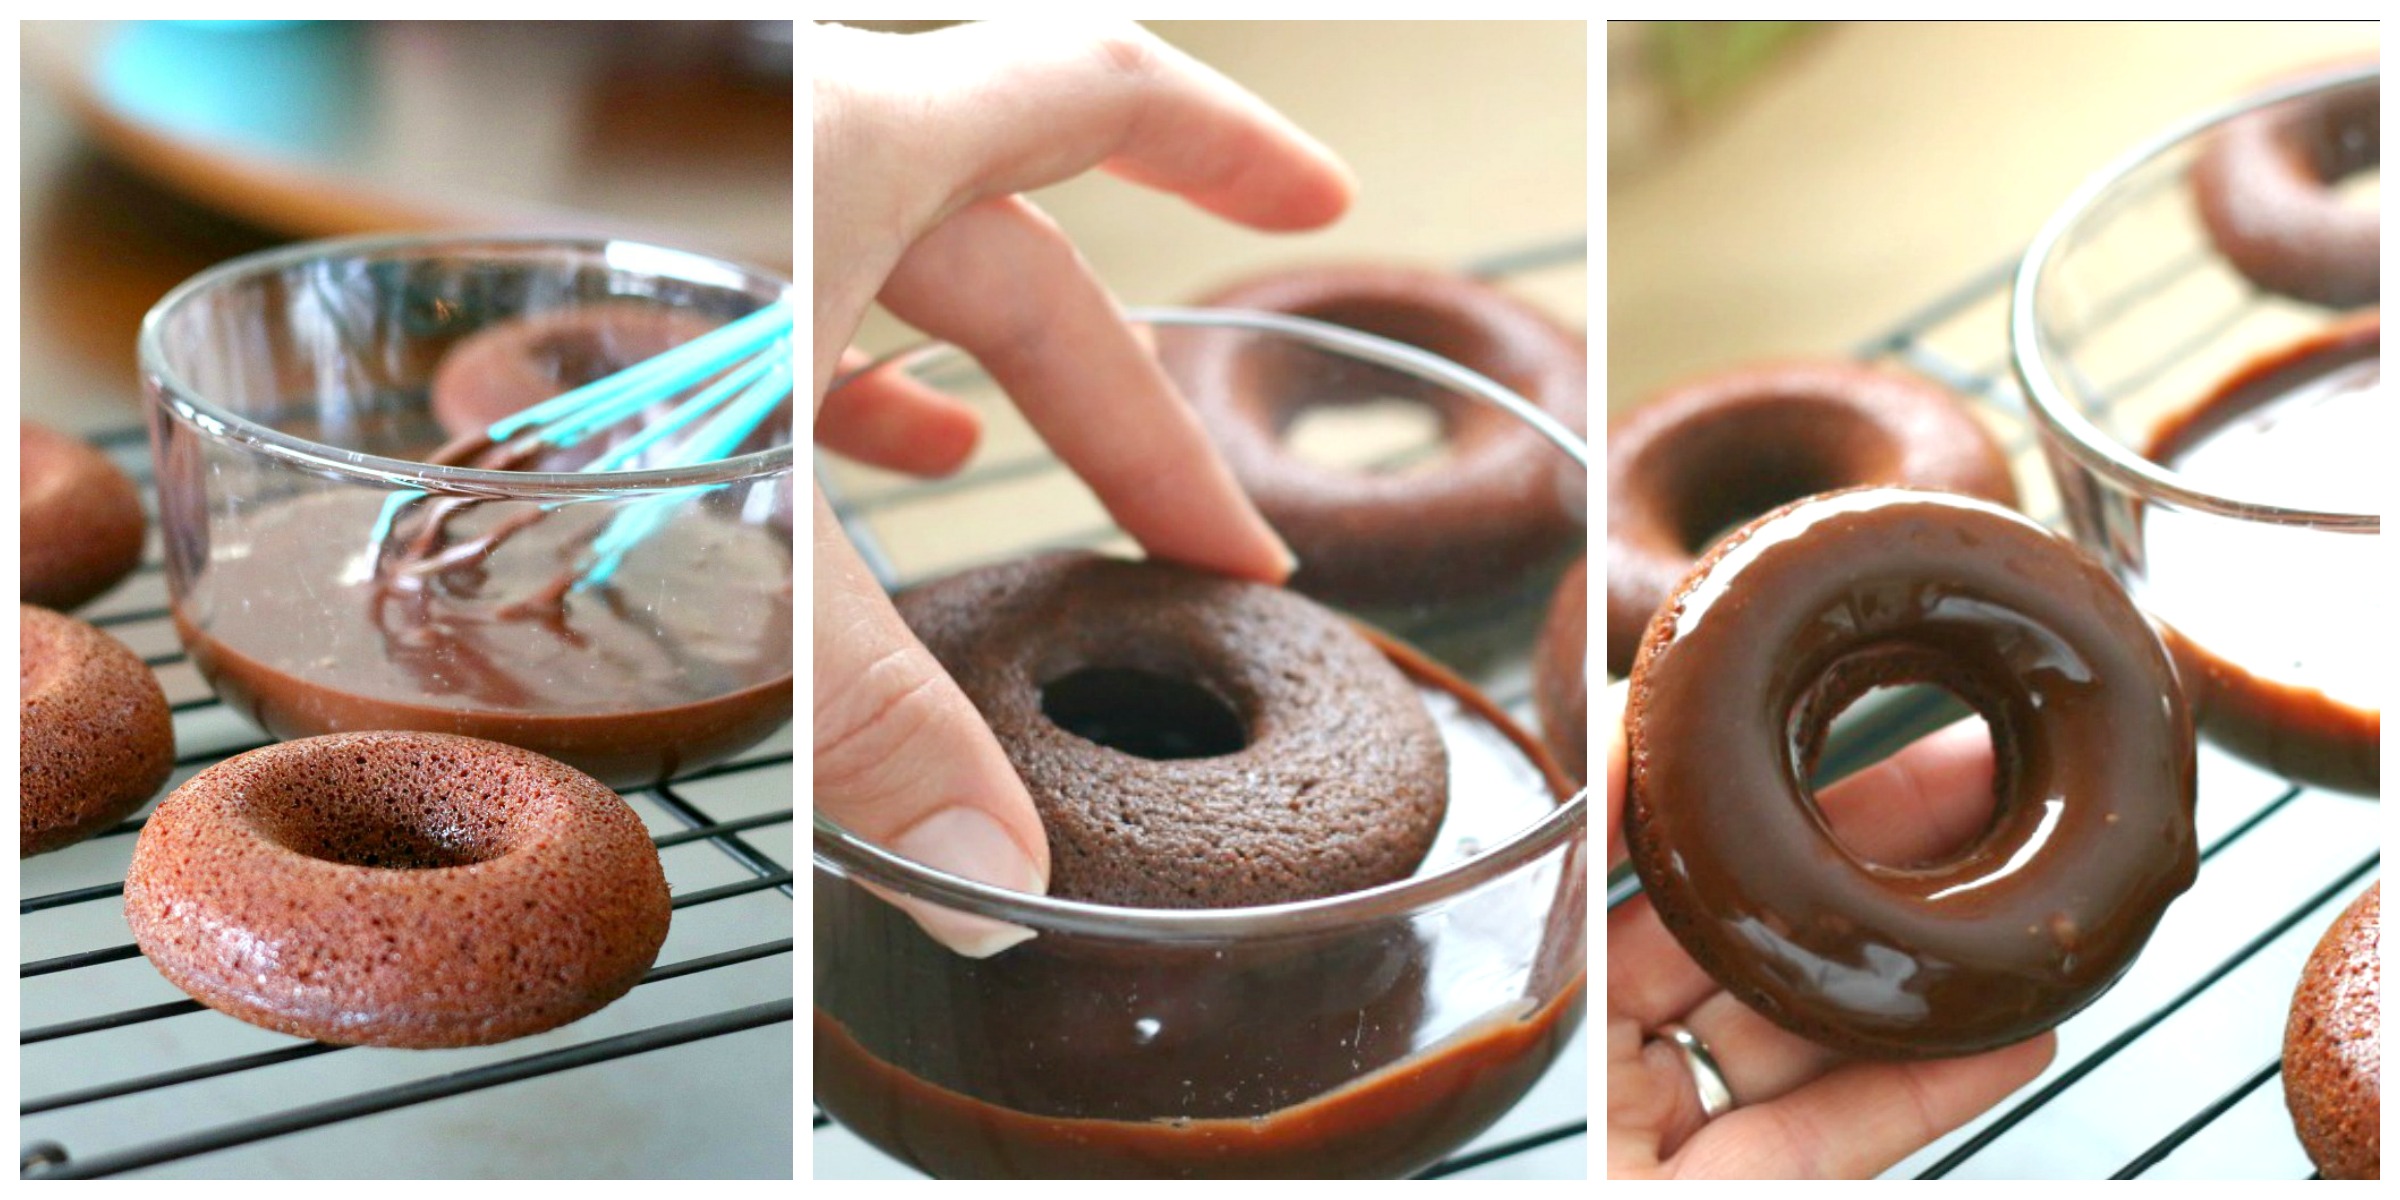 baked chocolate doughnuts collage 2